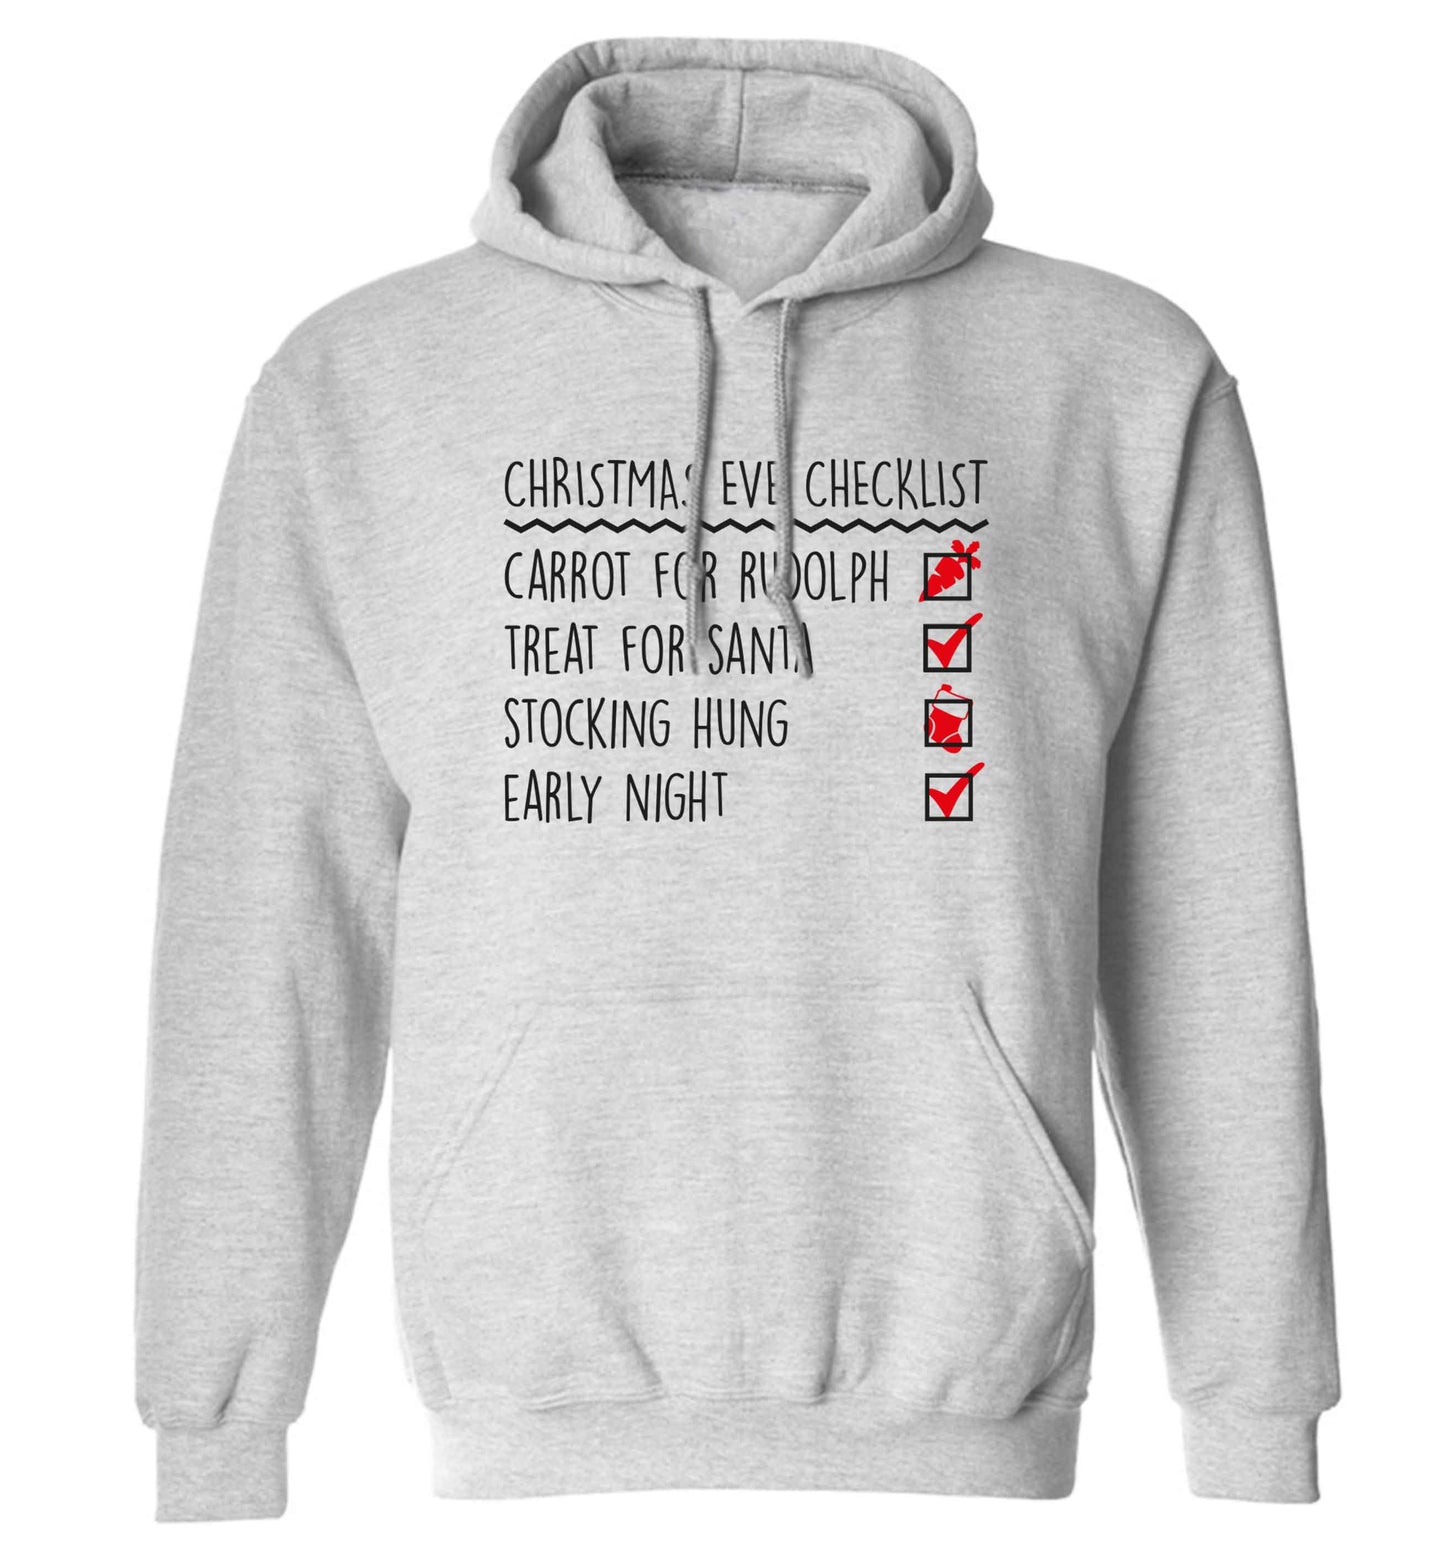 Candy Canes Candy Corns adults unisex grey hoodie 2XL